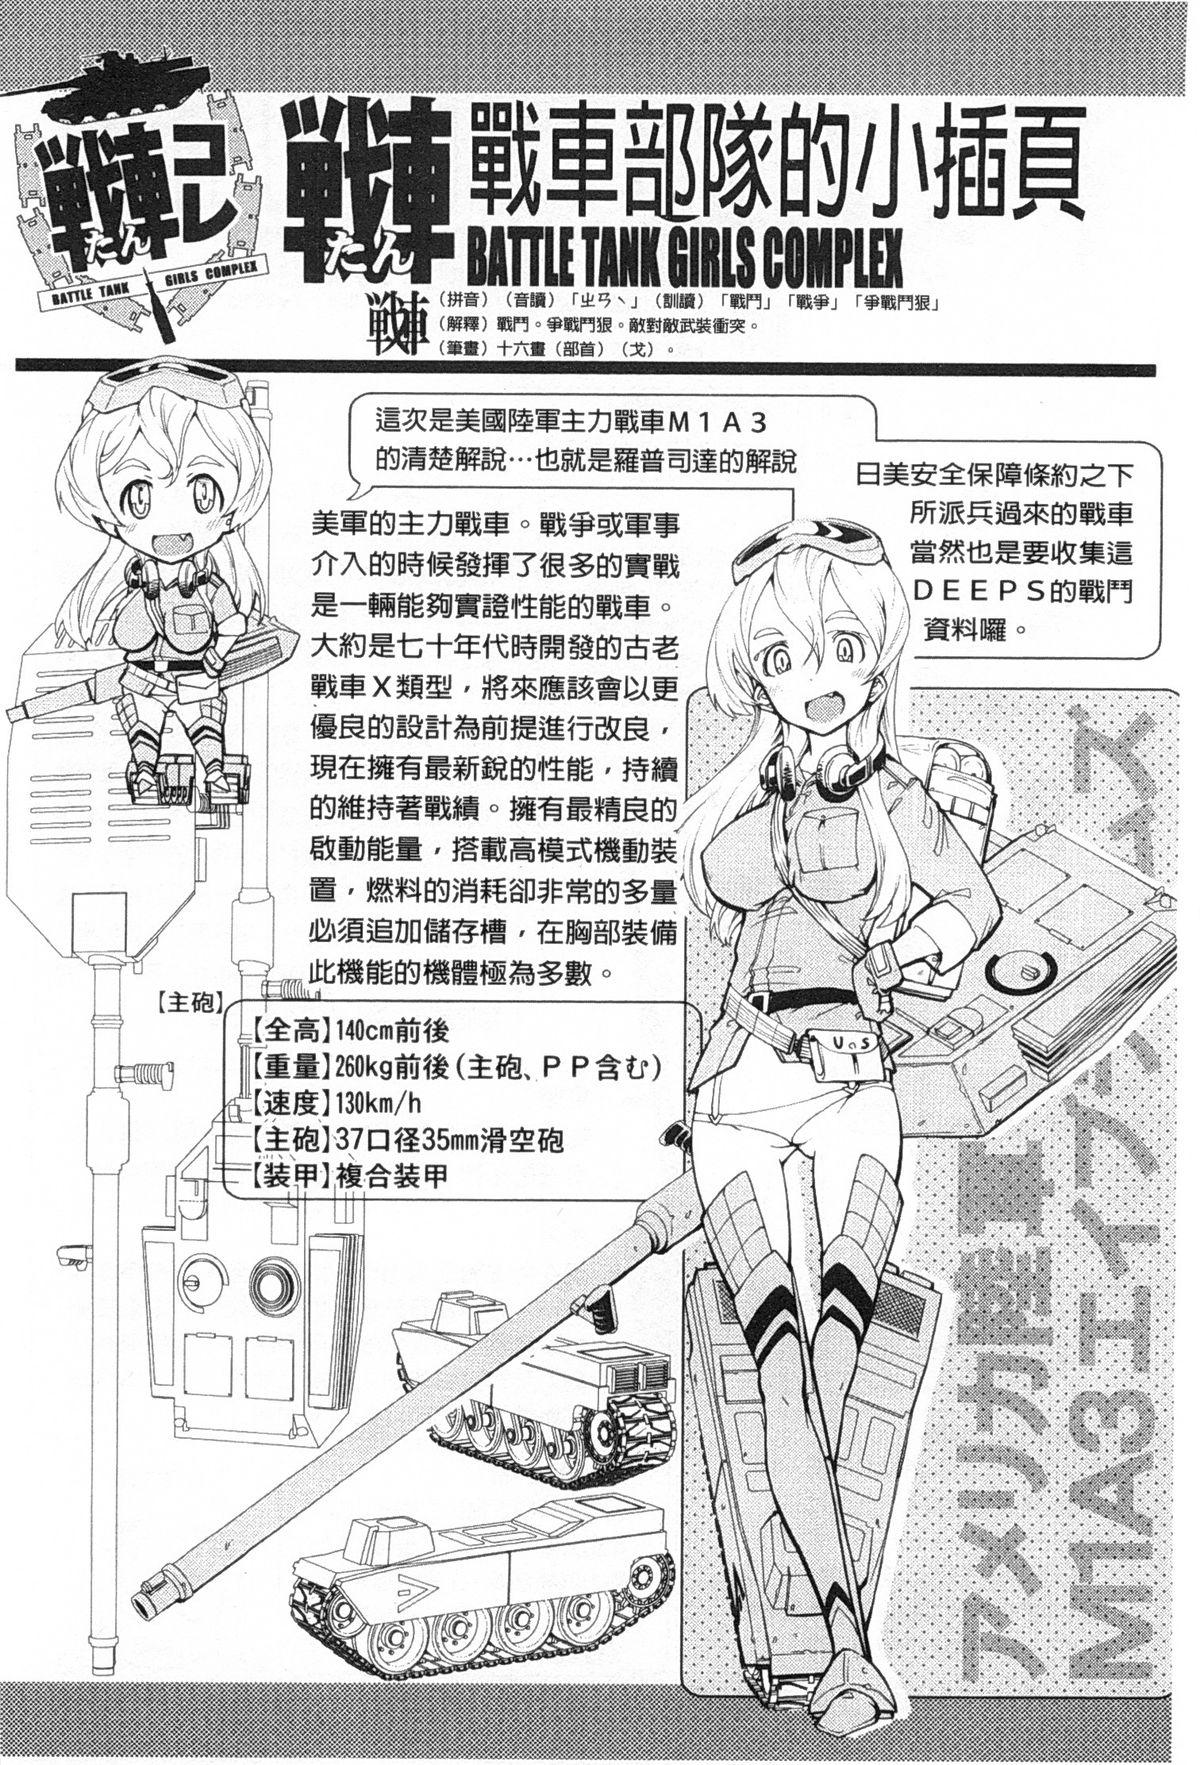 Tancolle - Battle Tank Girls Complex | TAN COLLE戰車收藏 118